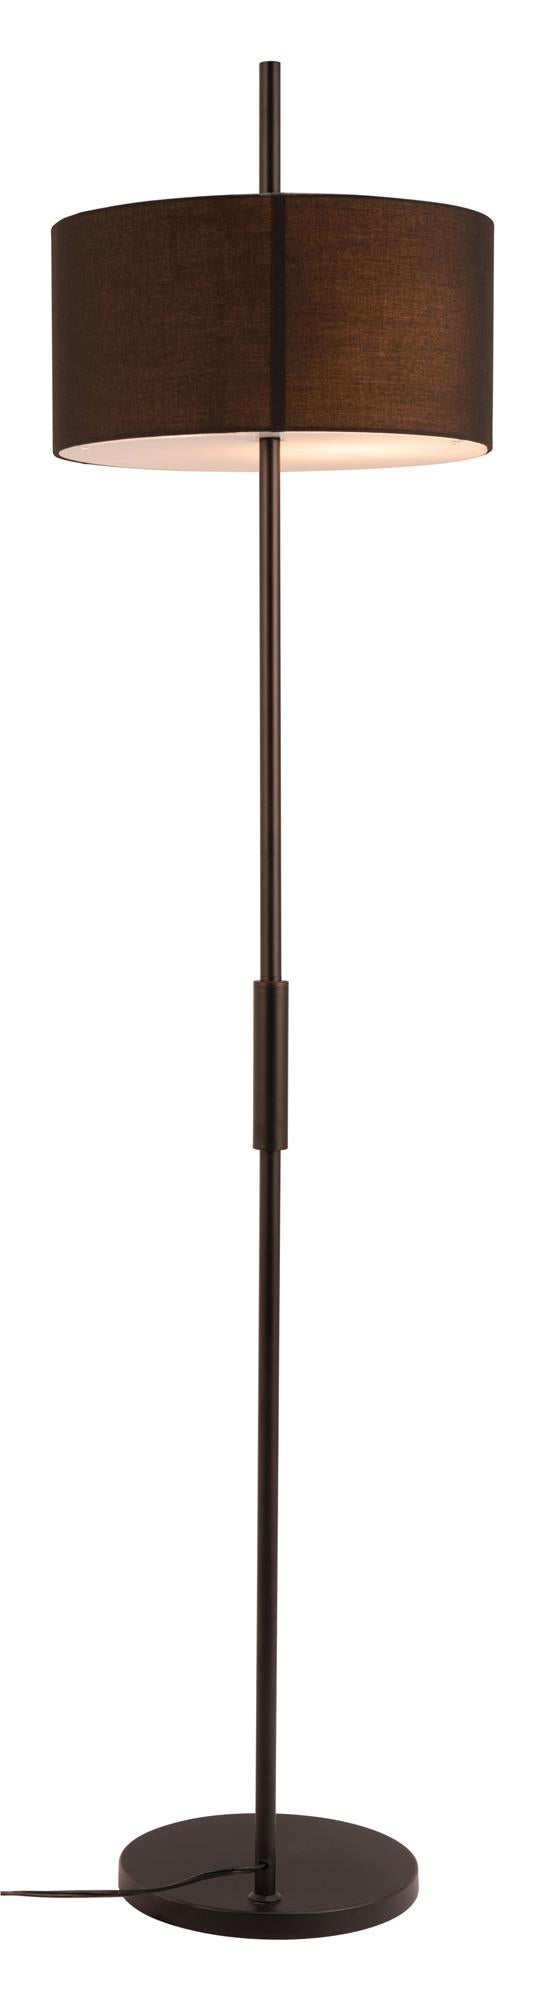 Floor-standing lamp by Brie with adjustable light -  N/A